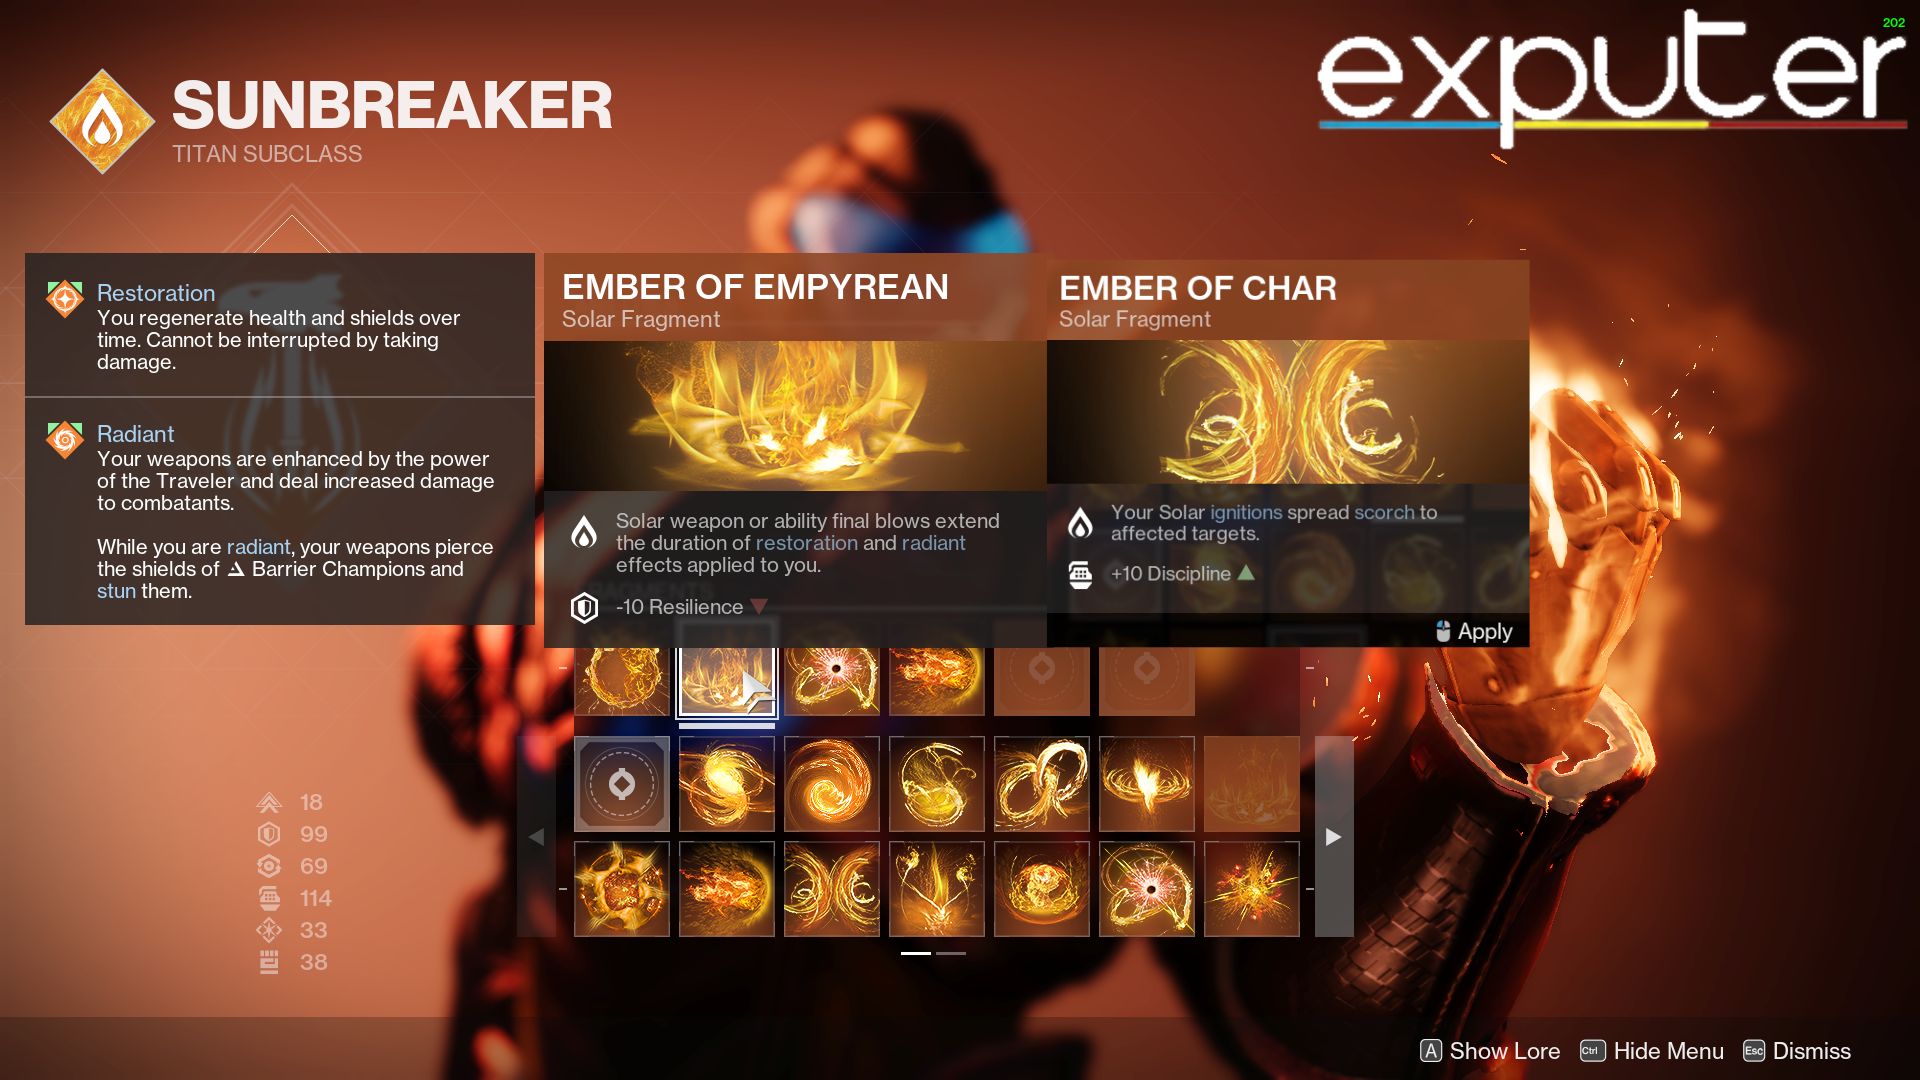 ember of char and empyrean fragments